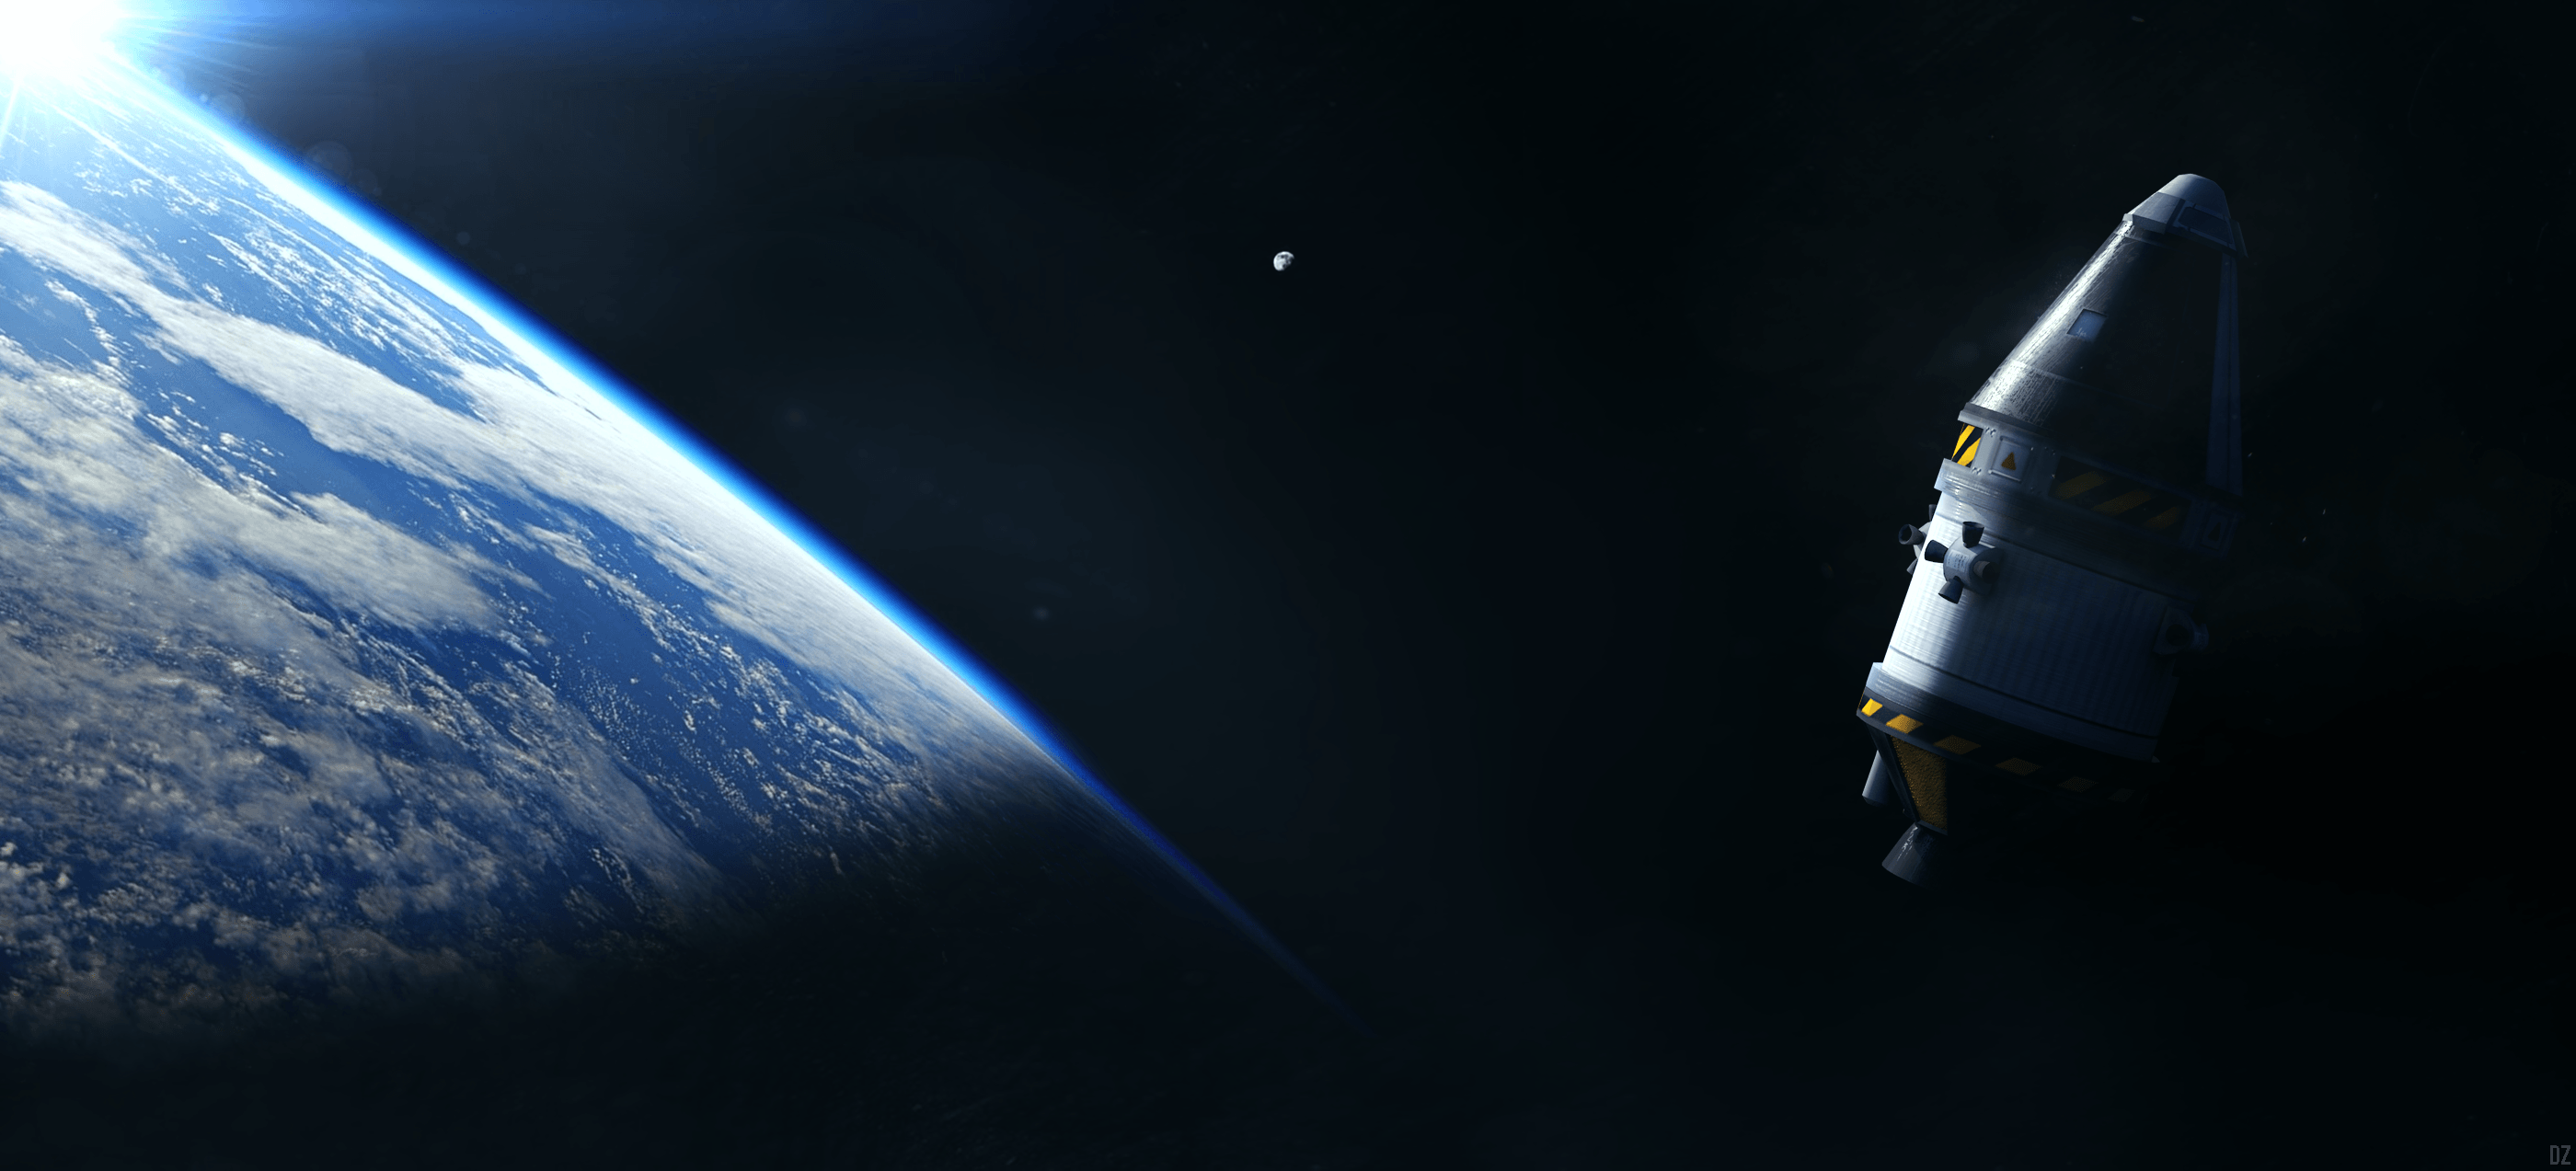 My attempt on a realistic KSP wallpaper